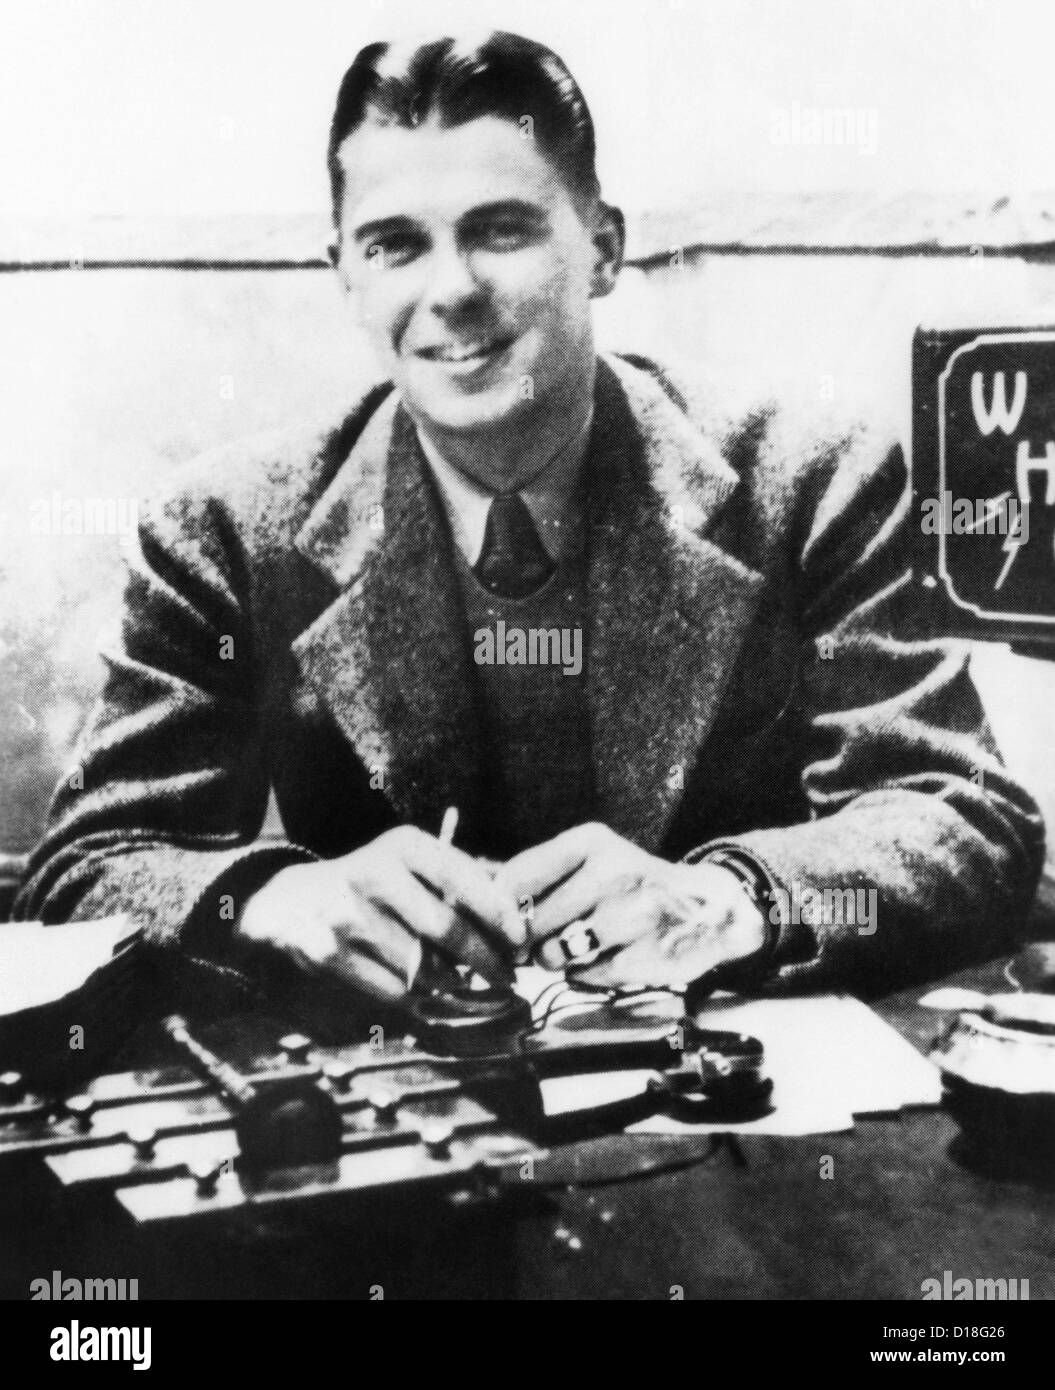 Ronald Reagan was a sports announcer at radio station WHO in Des Moines, Iowa. Ca.1930s. (CSU ALPHA 437) CSU Archives/Everett Stock Photo